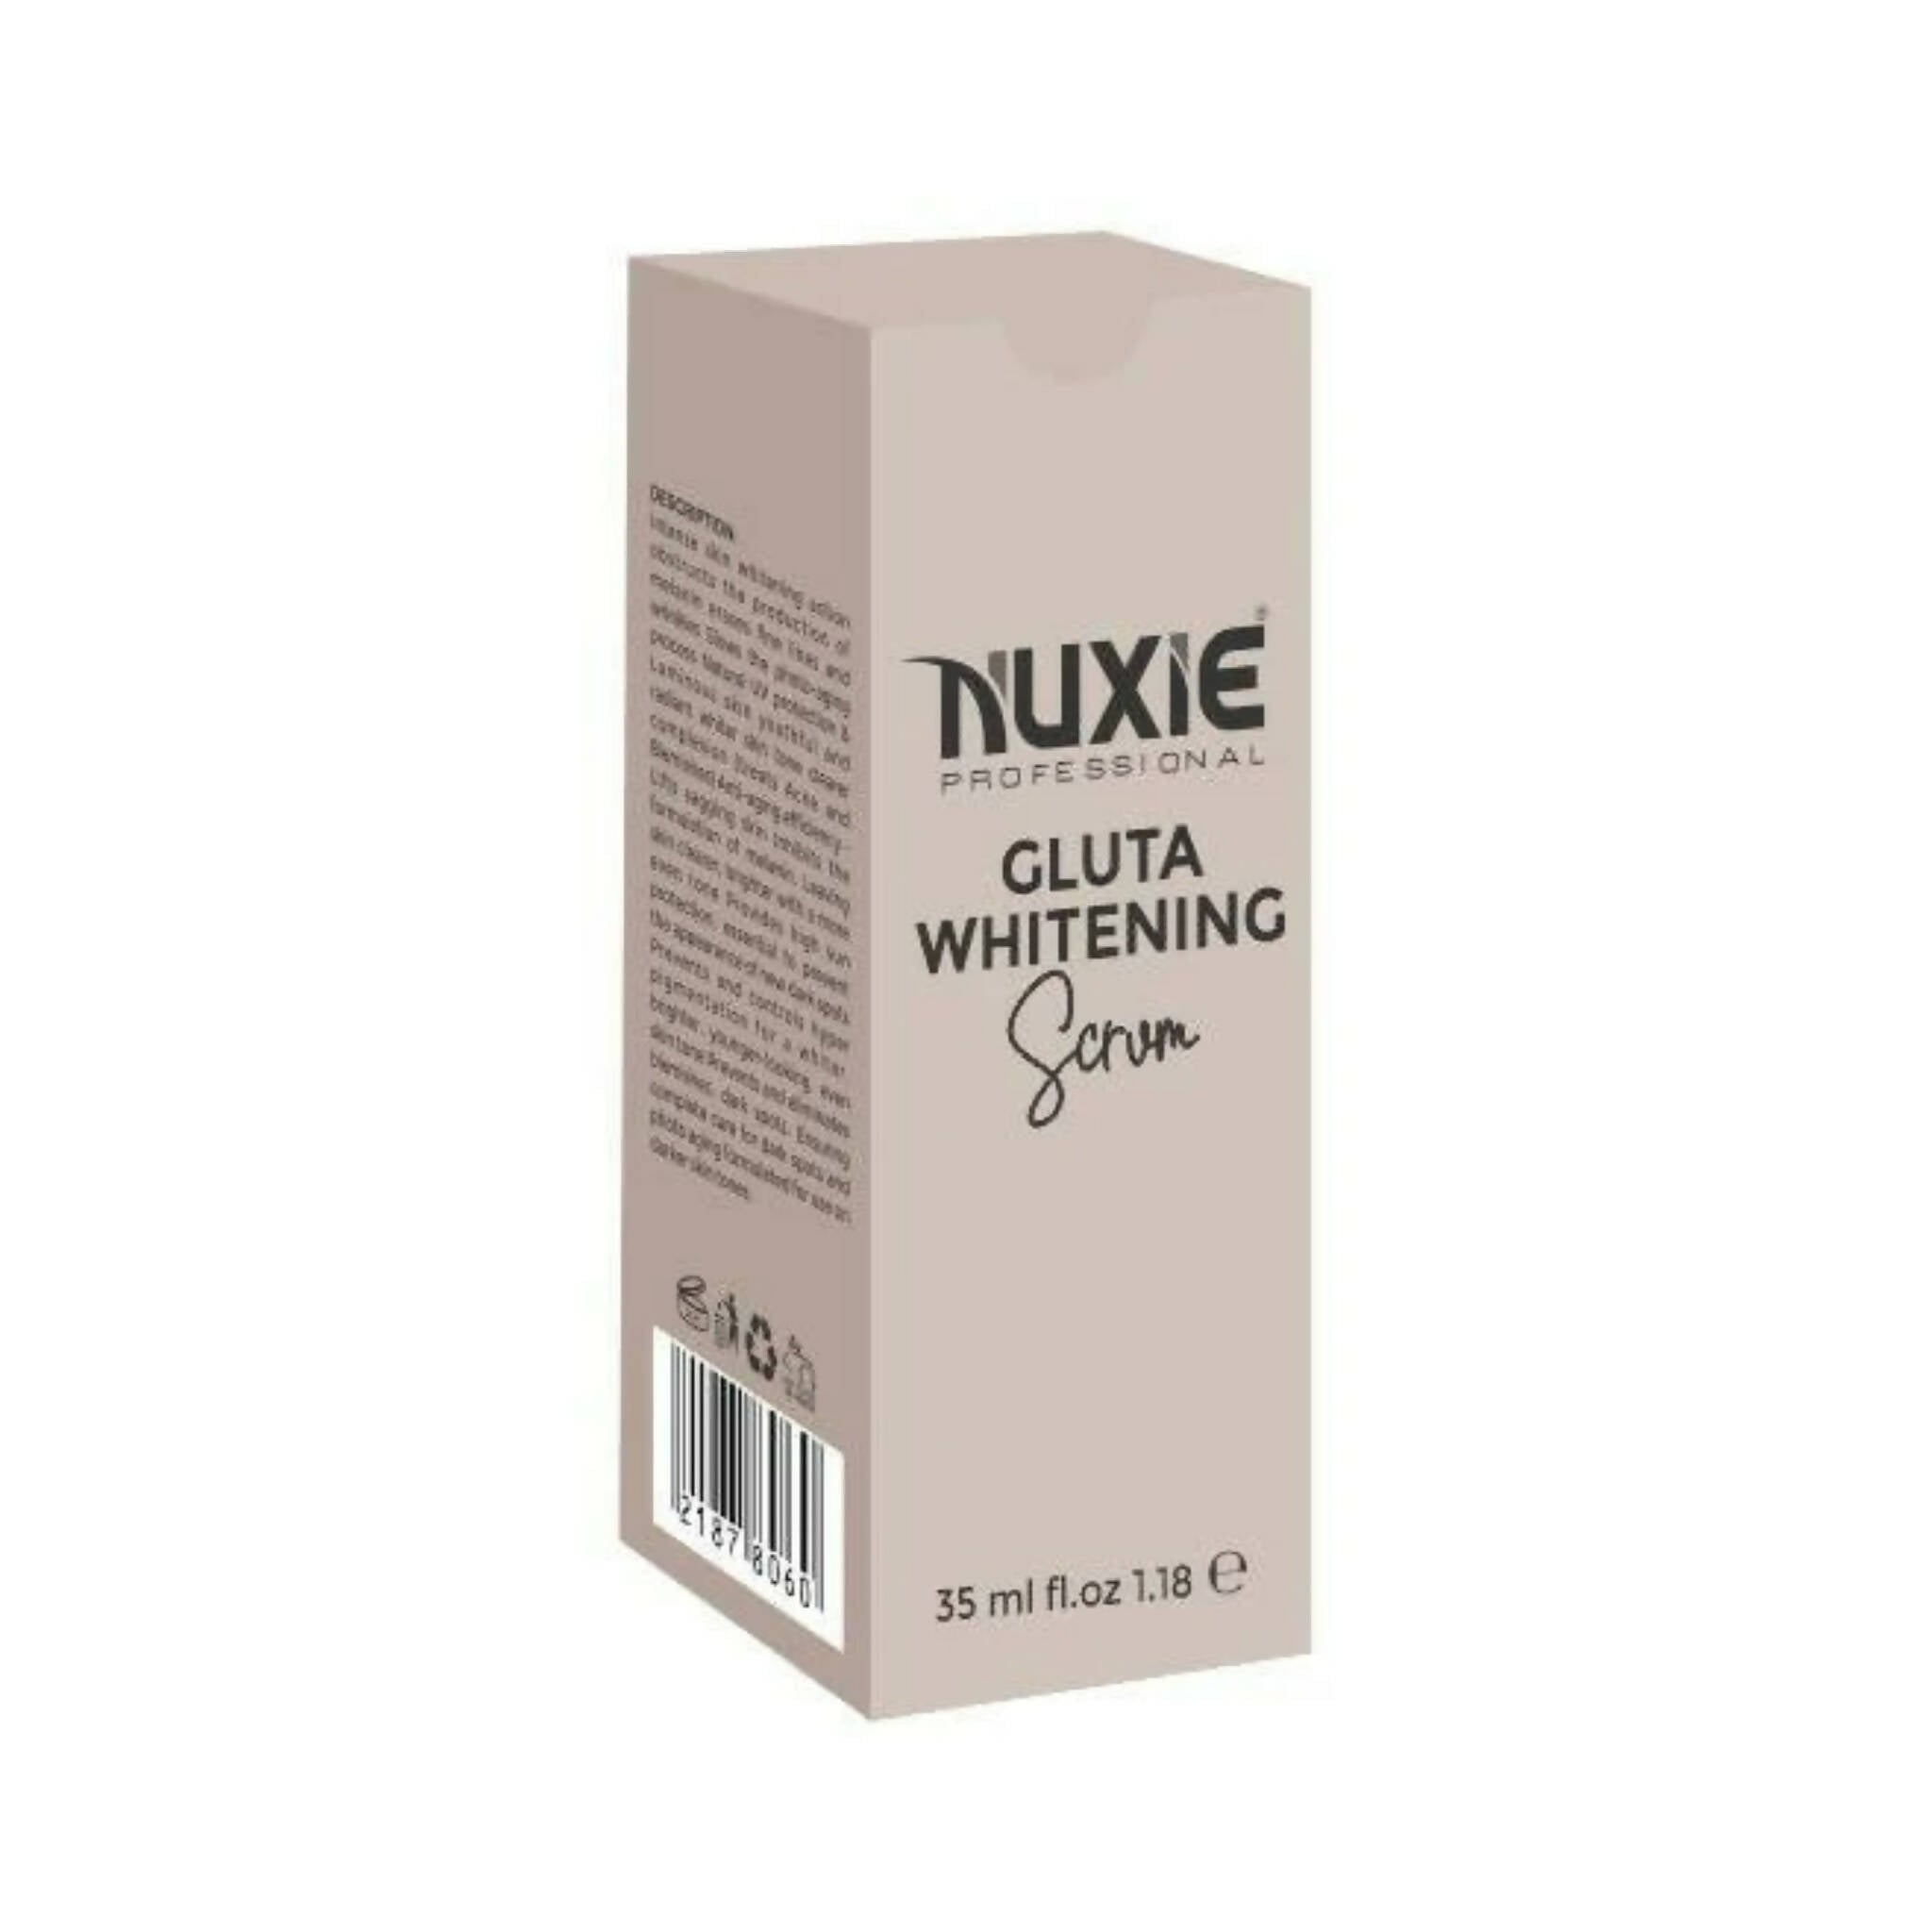 Nuxie Gluta Whitening Scrum, for Brighten & Even Out The Skin Tone